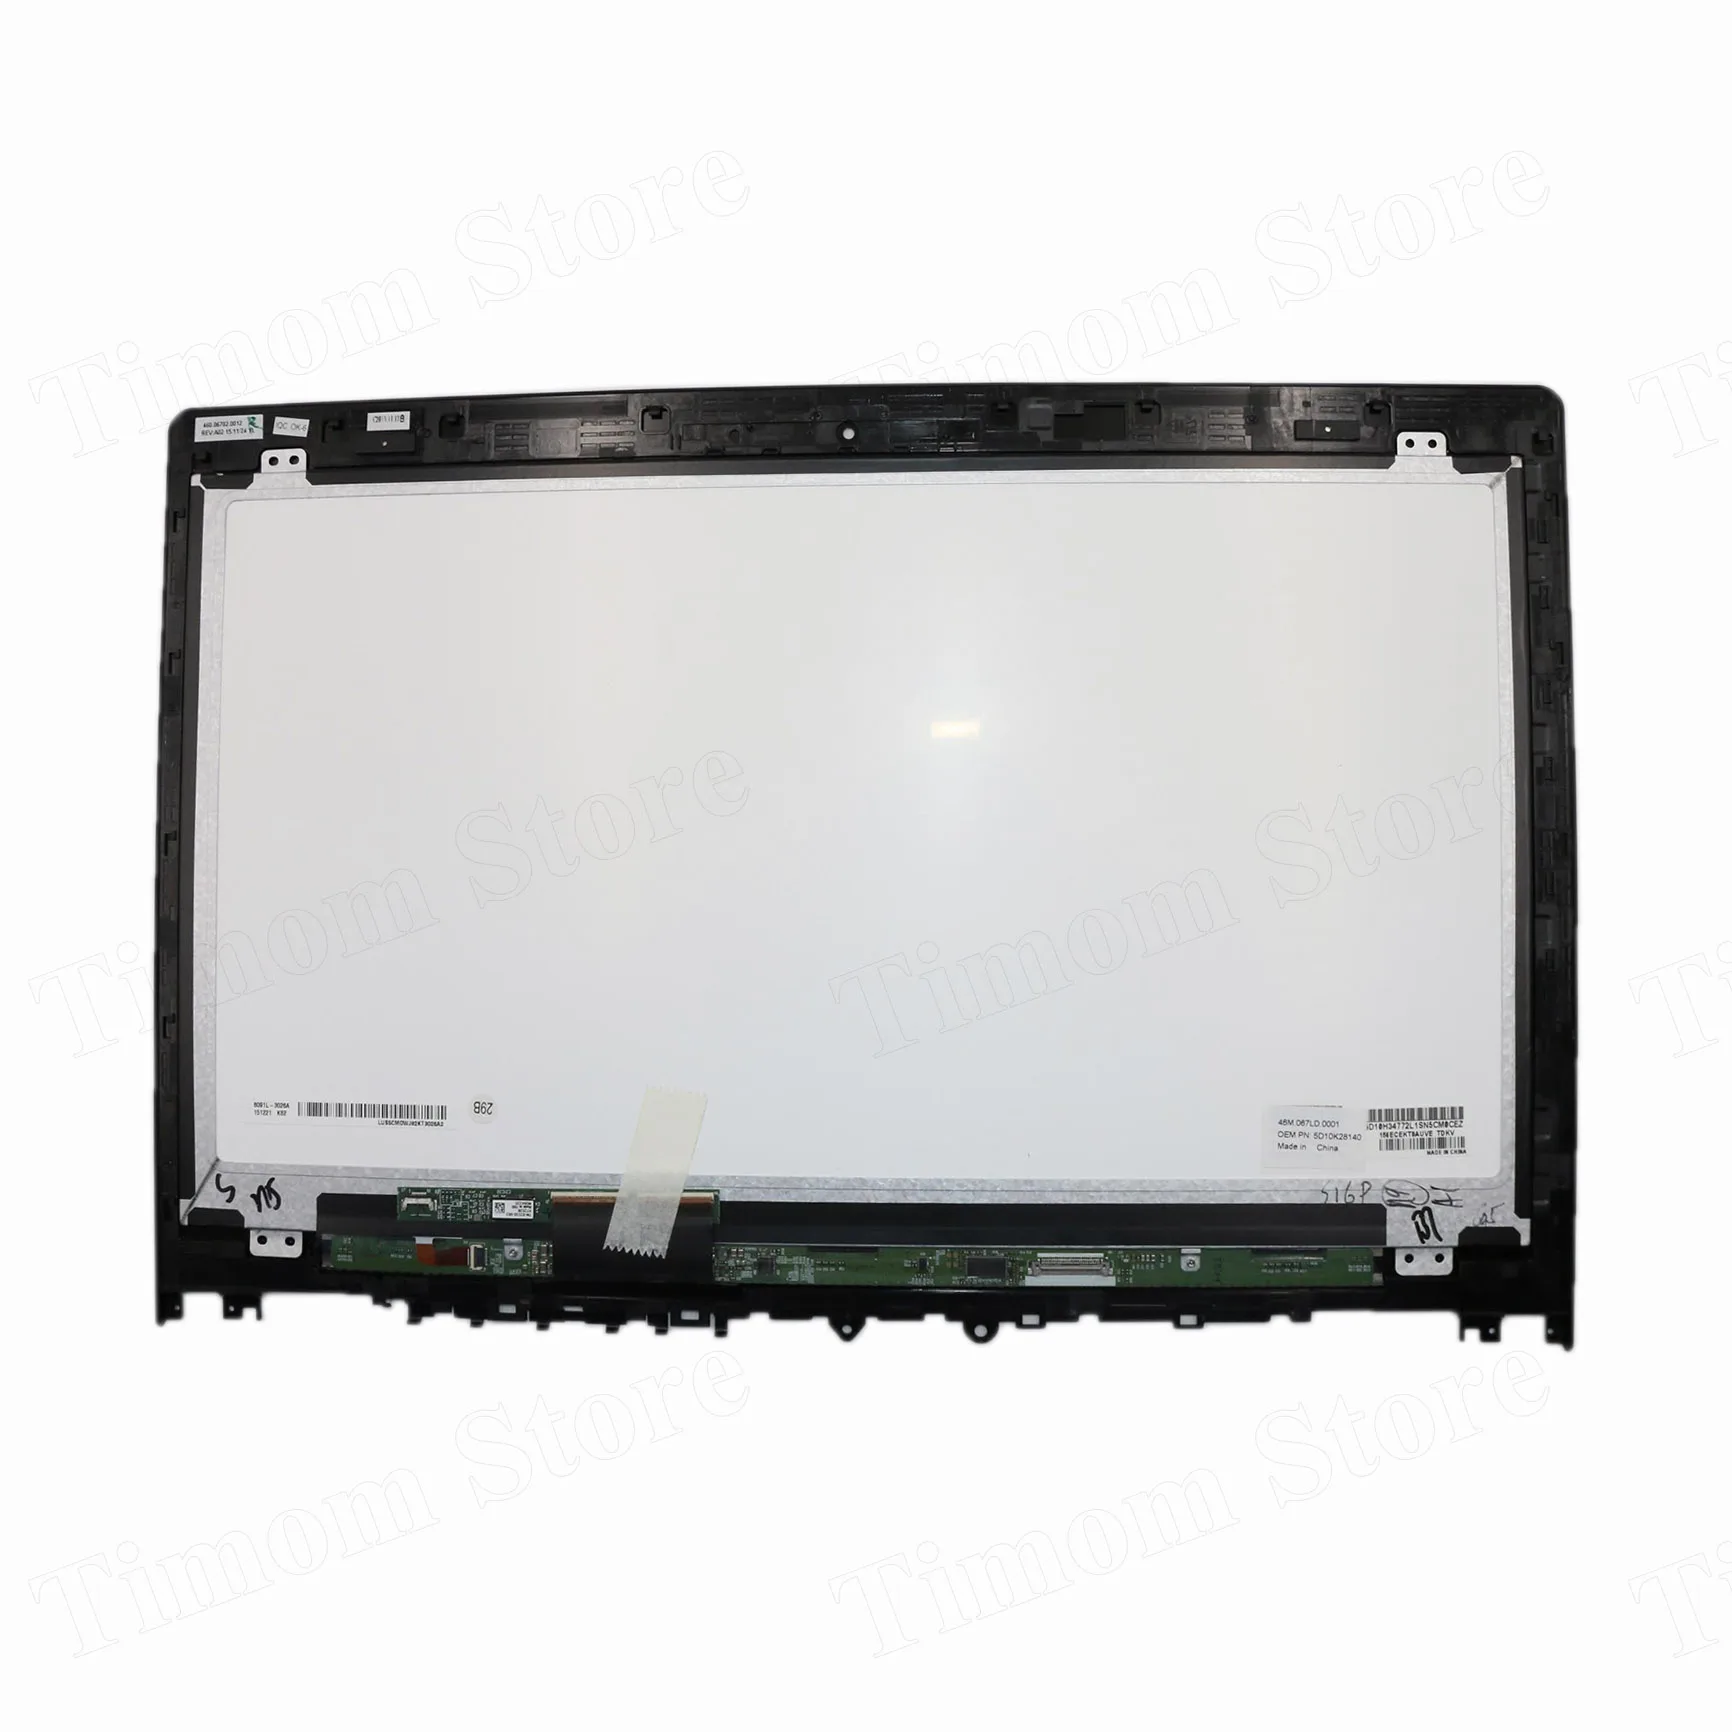 for edge 2 1580 2 15 lenovo 80qf laptop lcd assemblies bezel 5d10k28140 fhd 19201080 30pin display 15 6 touch screen digitizer free global shipping